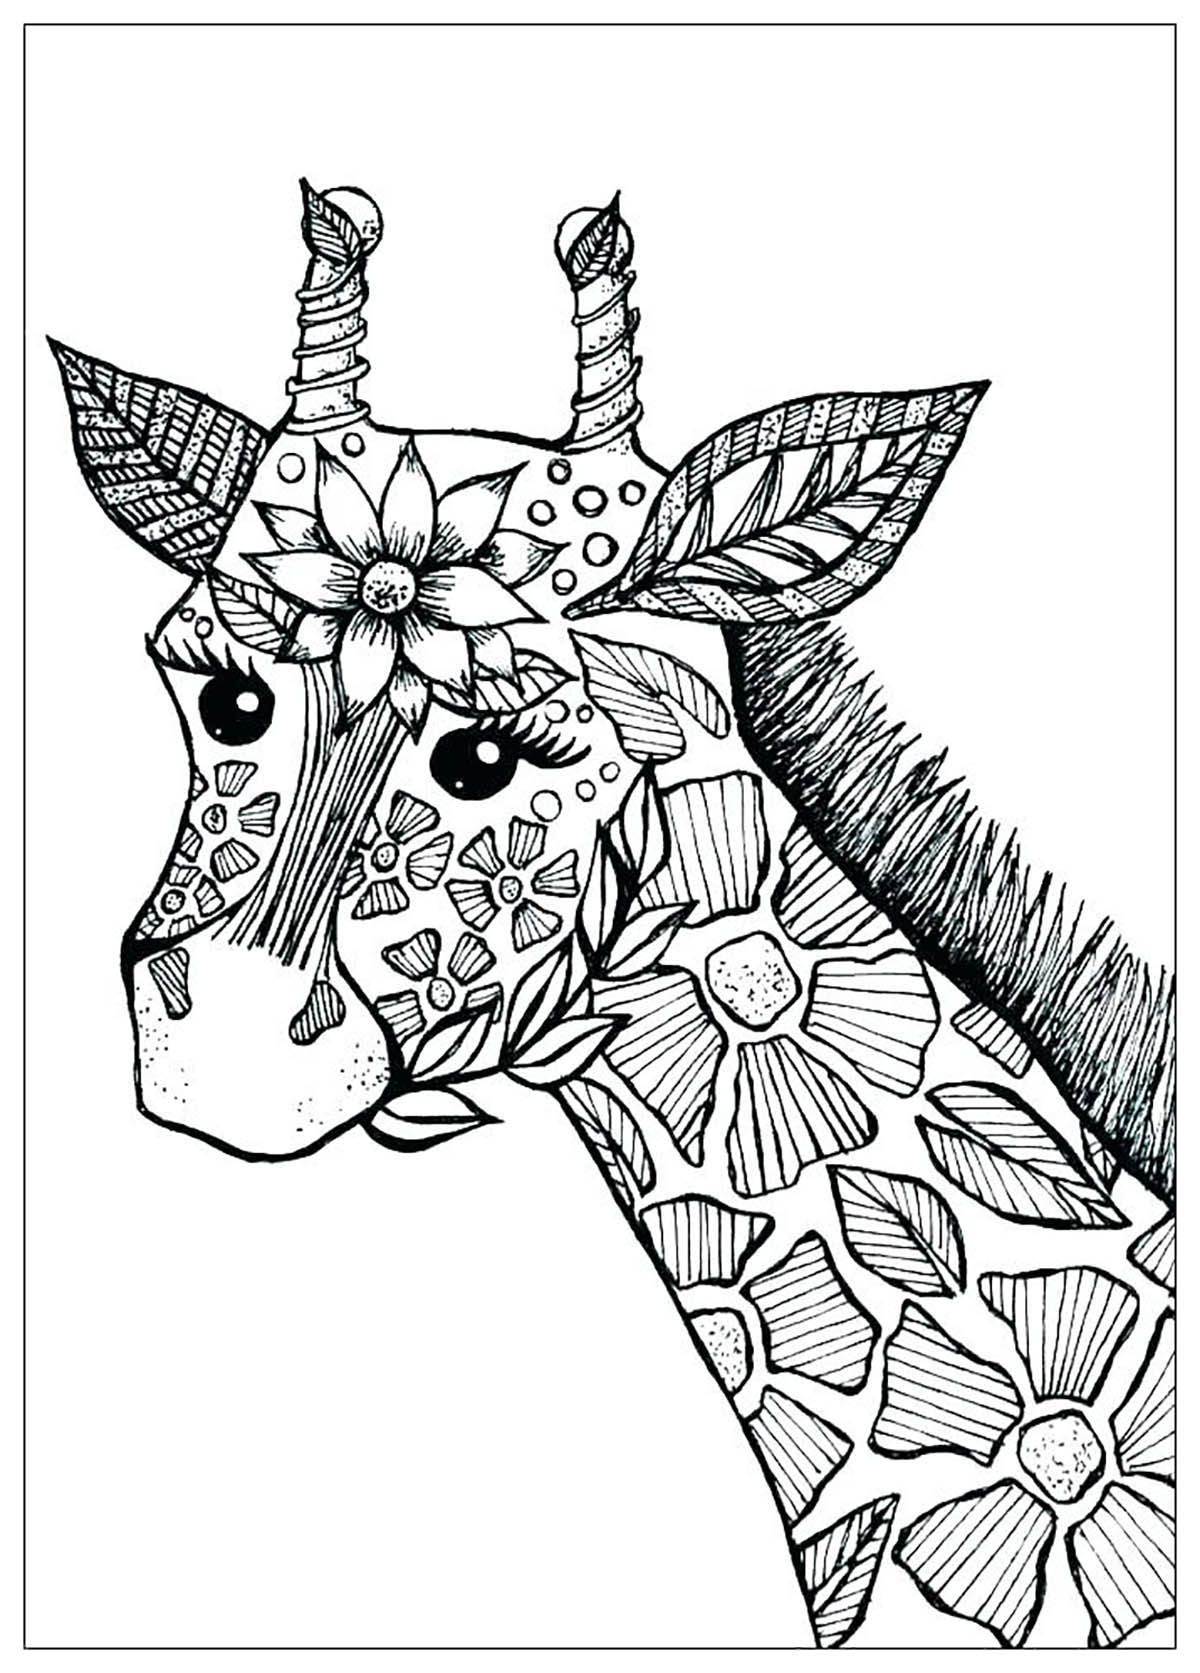 Download Giraffes to download for free - Giraffes Kids Coloring Pages